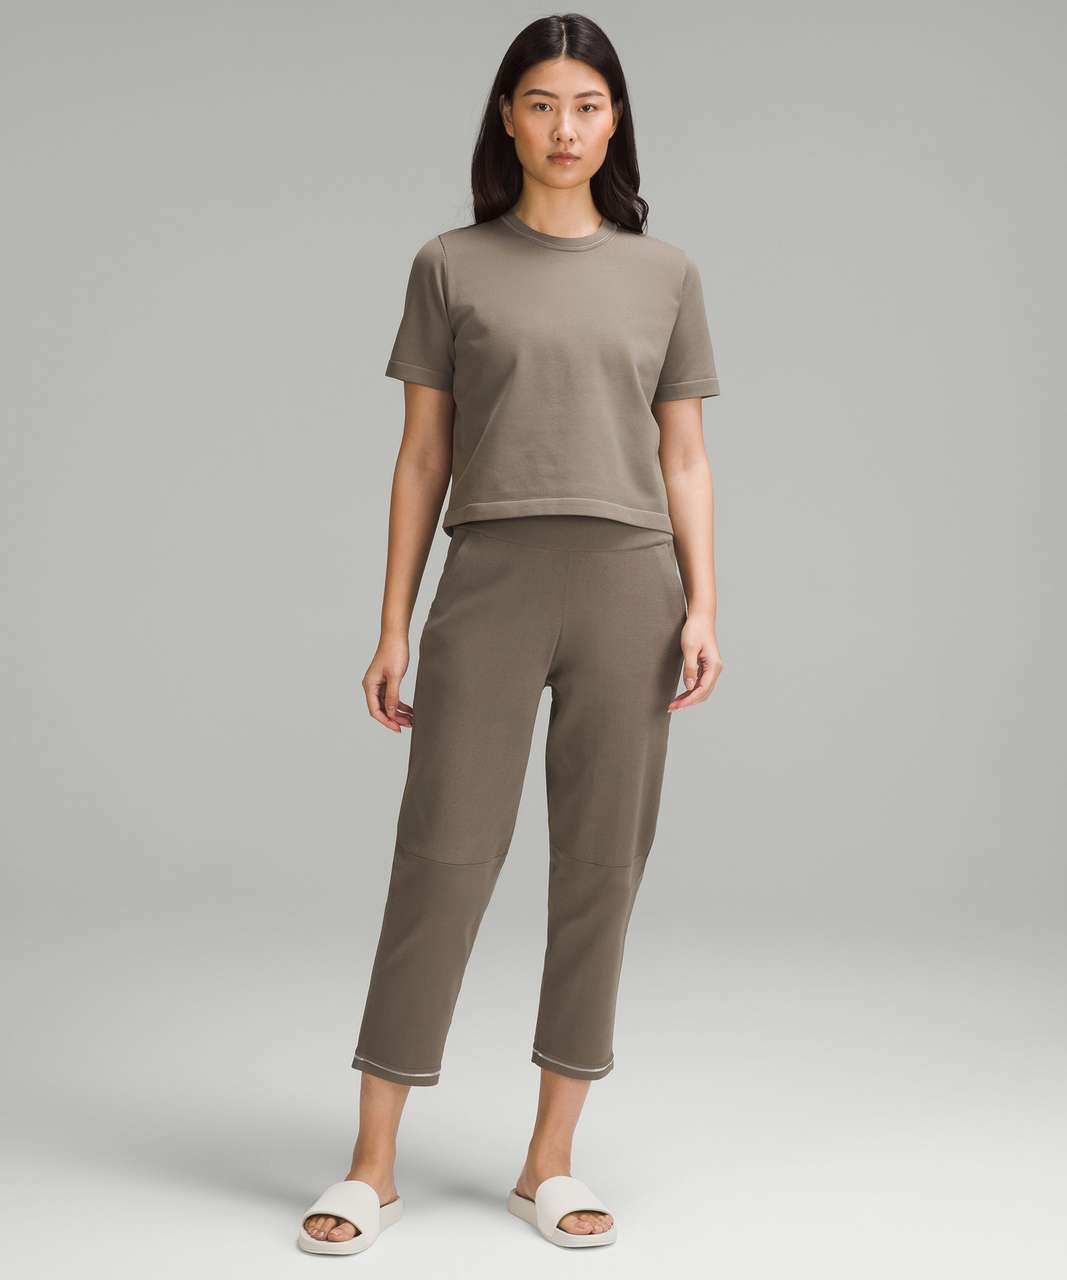 Lululemon Relaxed-Fit High-Rise Knit Cropped Pants 24" - Nomad